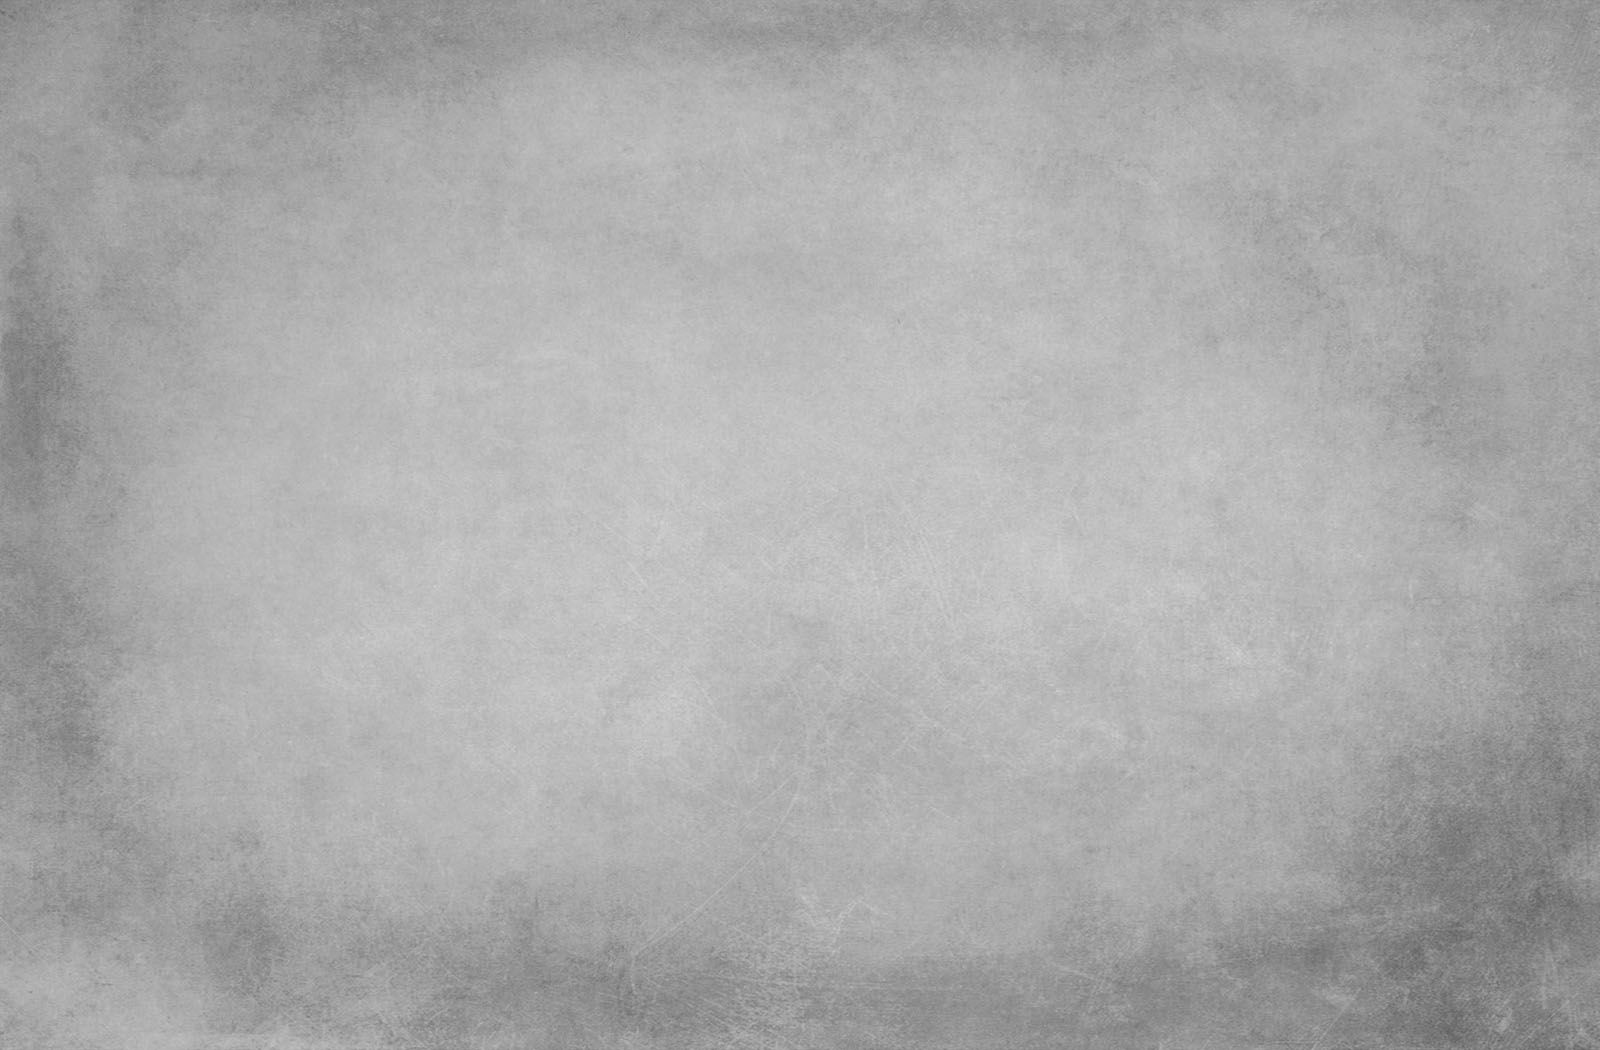 Free download Solid Light Grey Background Solid light grey